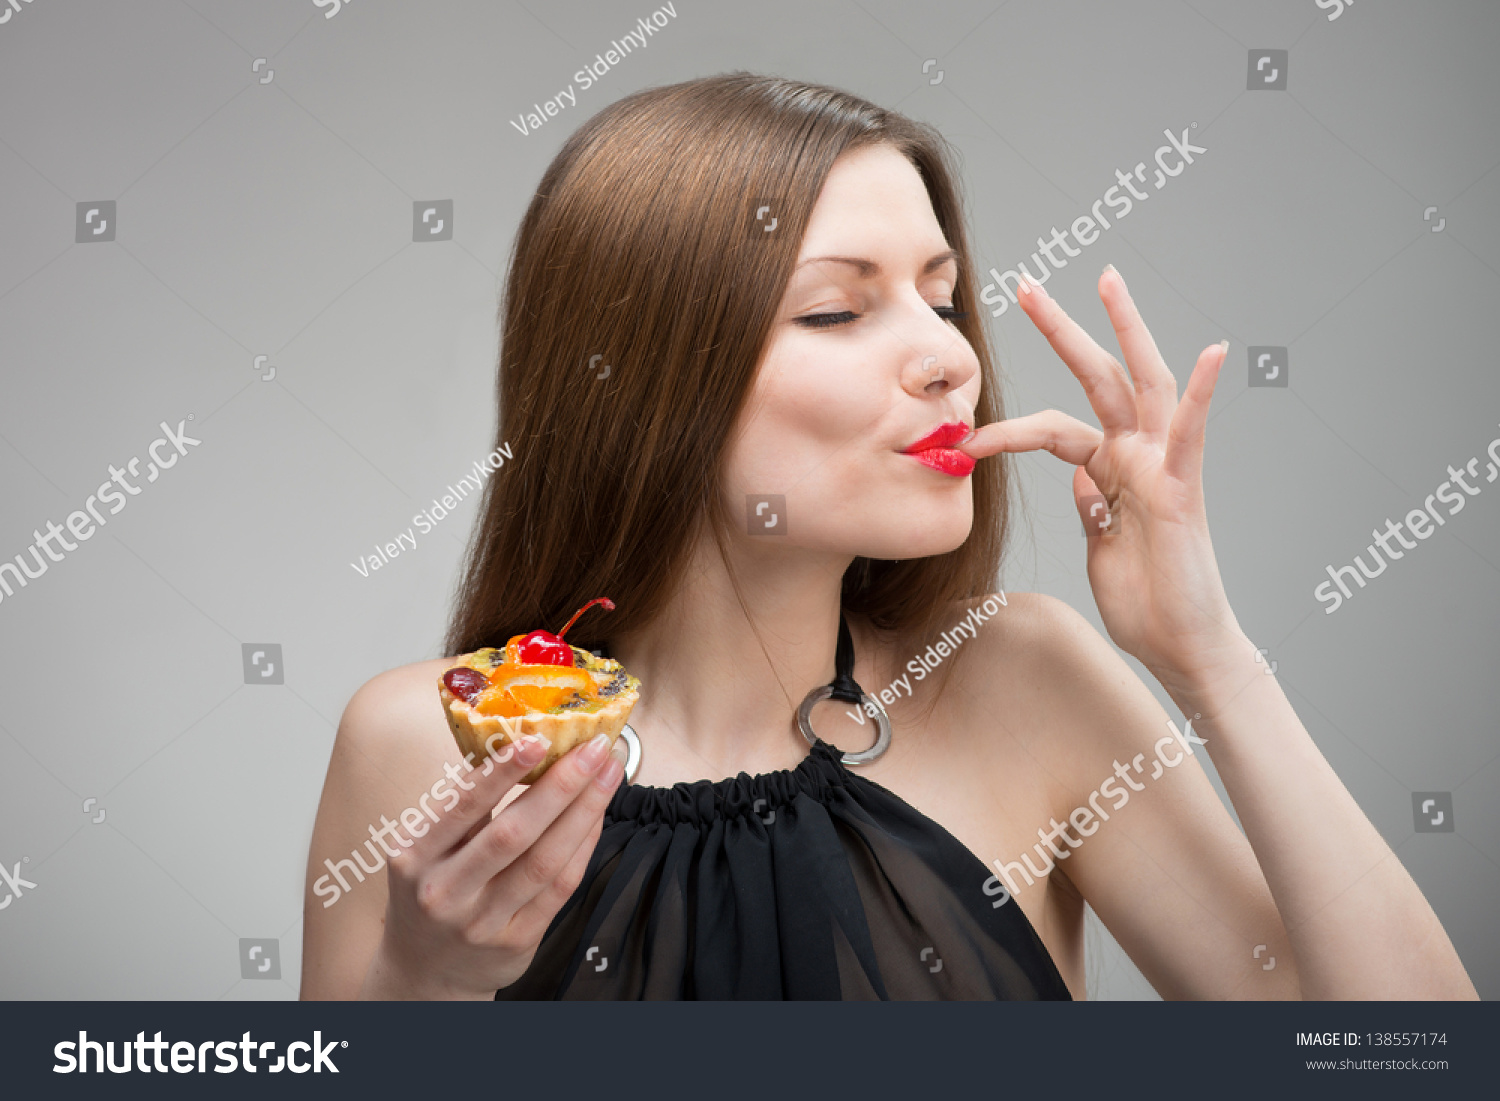 Portrait of young woman enjoying the cake #138557174